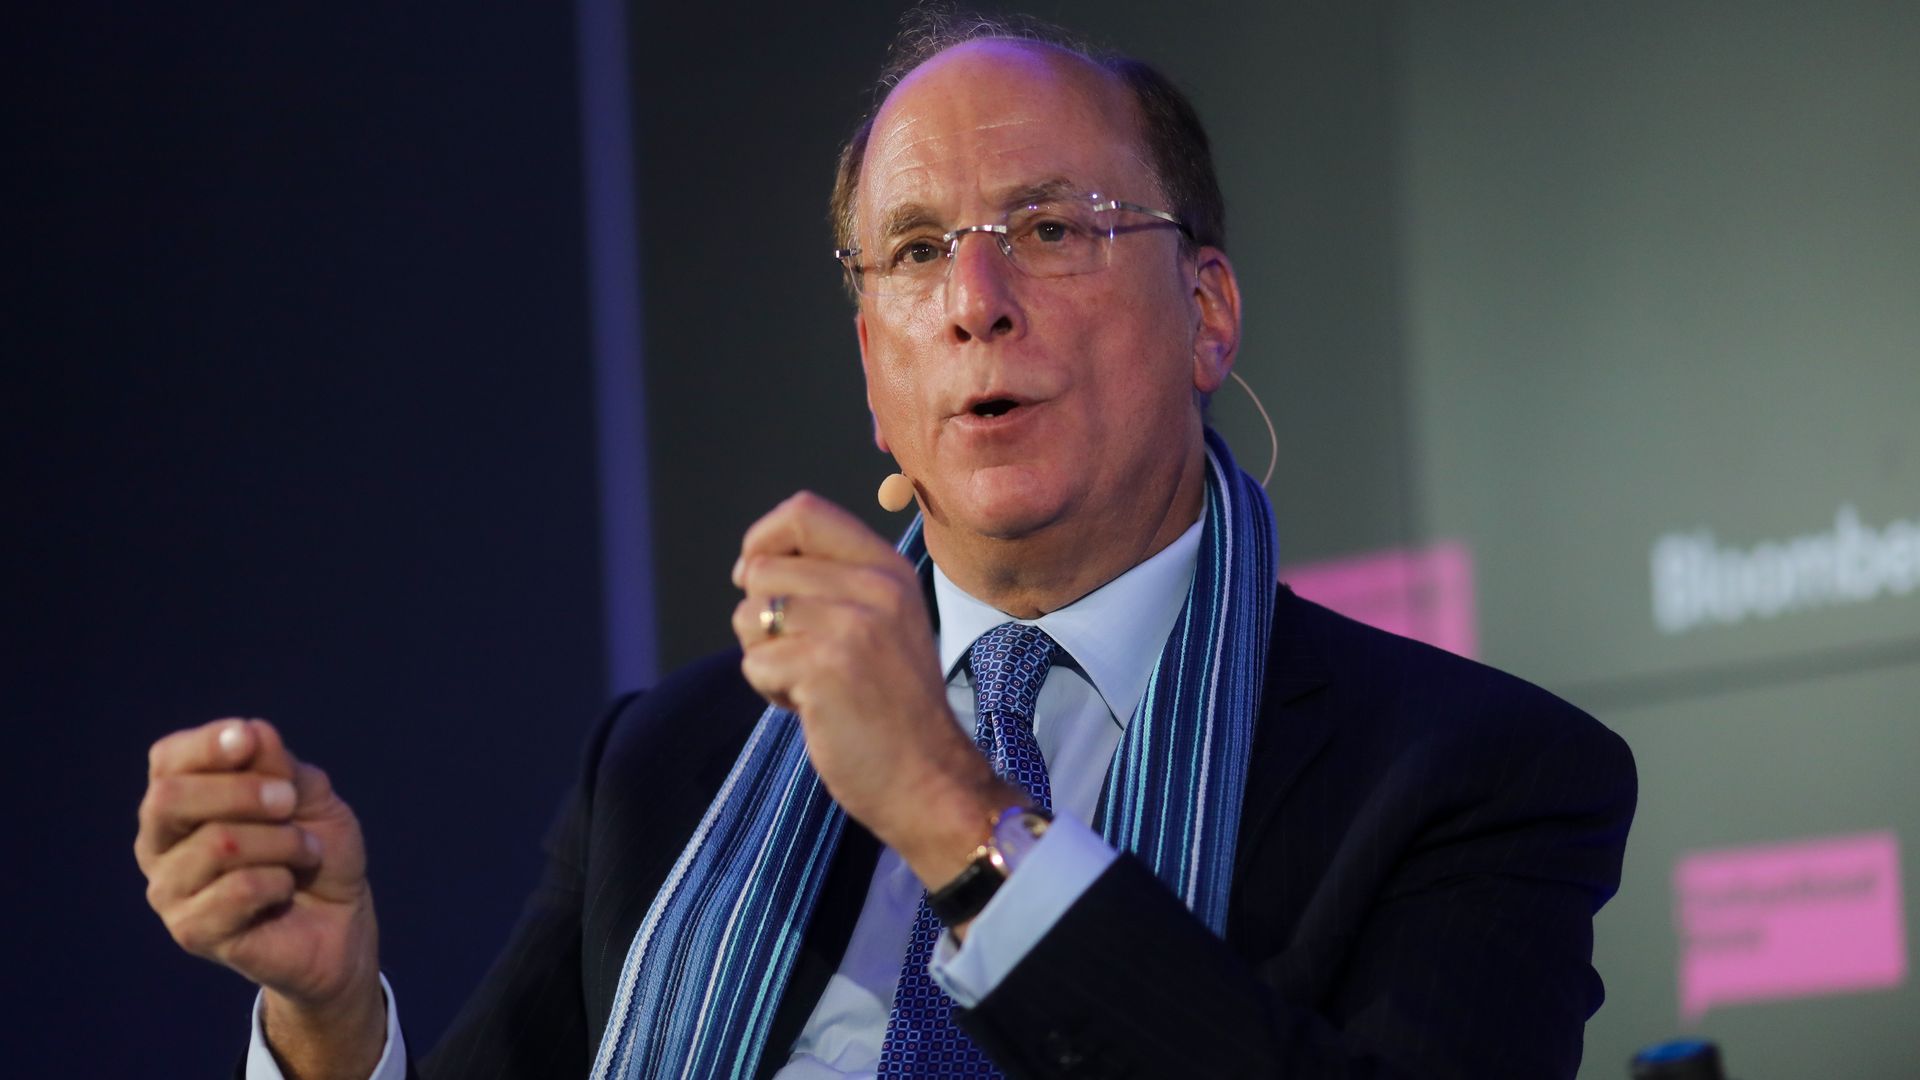 Larry Fink speaks during an event at the World Economic Forum in Davos, Switzerland, Jan. 21, 2020.